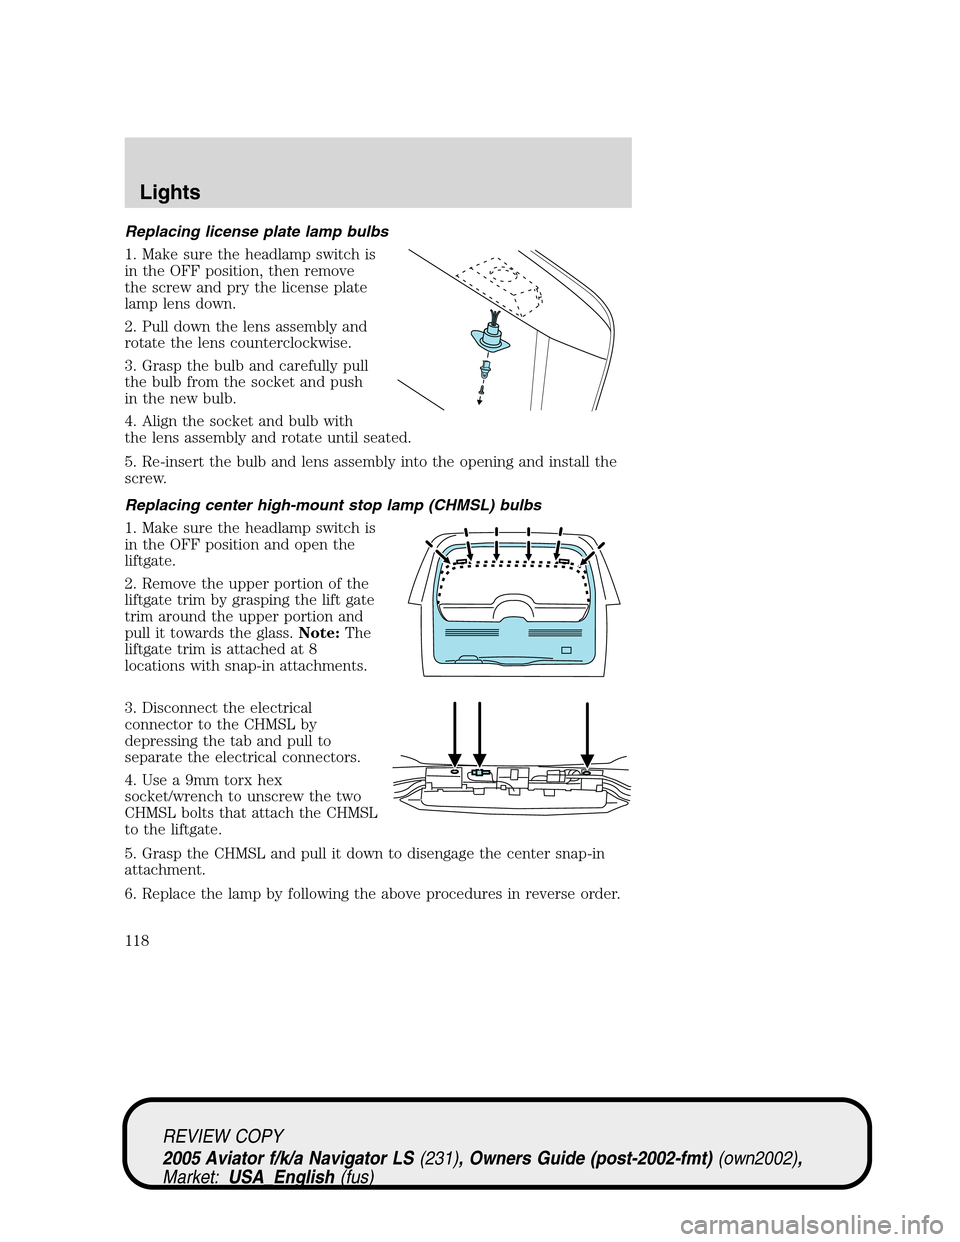 LINCOLN AVIATOR 2005 User Guide Replacing license plate lamp bulbs
1. Make sure the headlamp switch is
in the OFF position, then remove
the screw and pry the license plate
lamp lens down.
2. Pull down the lens assembly and
rotate th